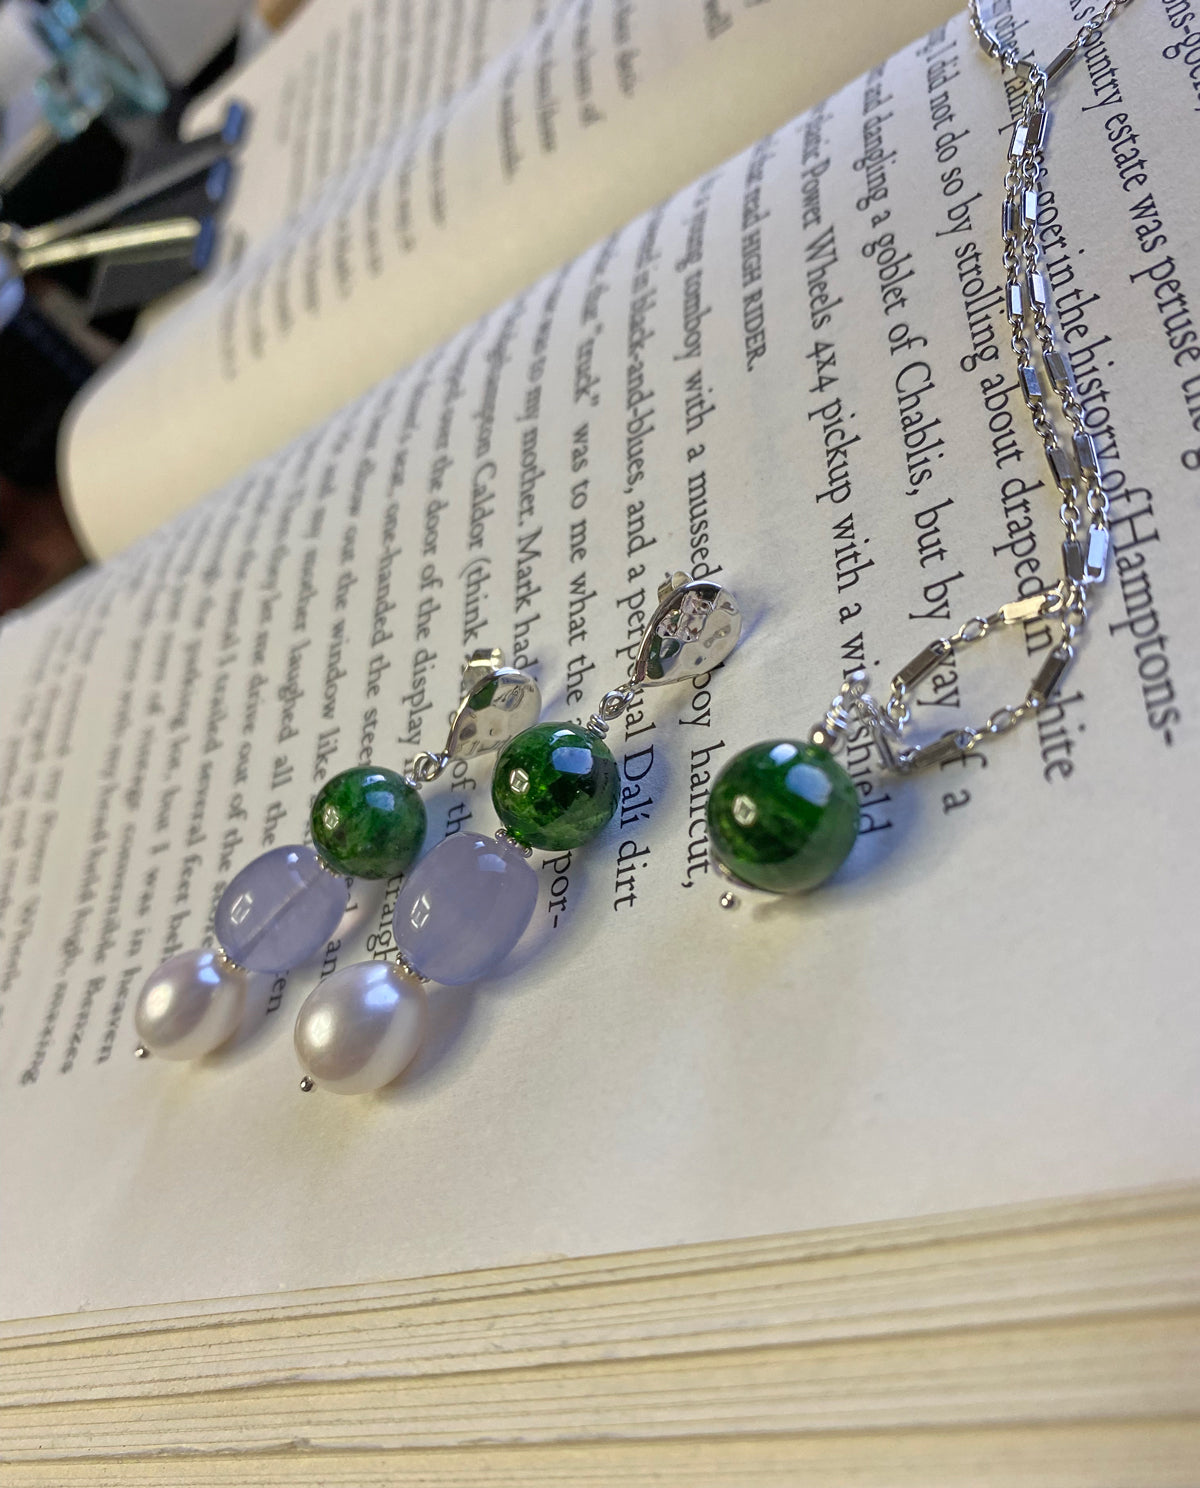 10mm Chrome Diopside Necklace